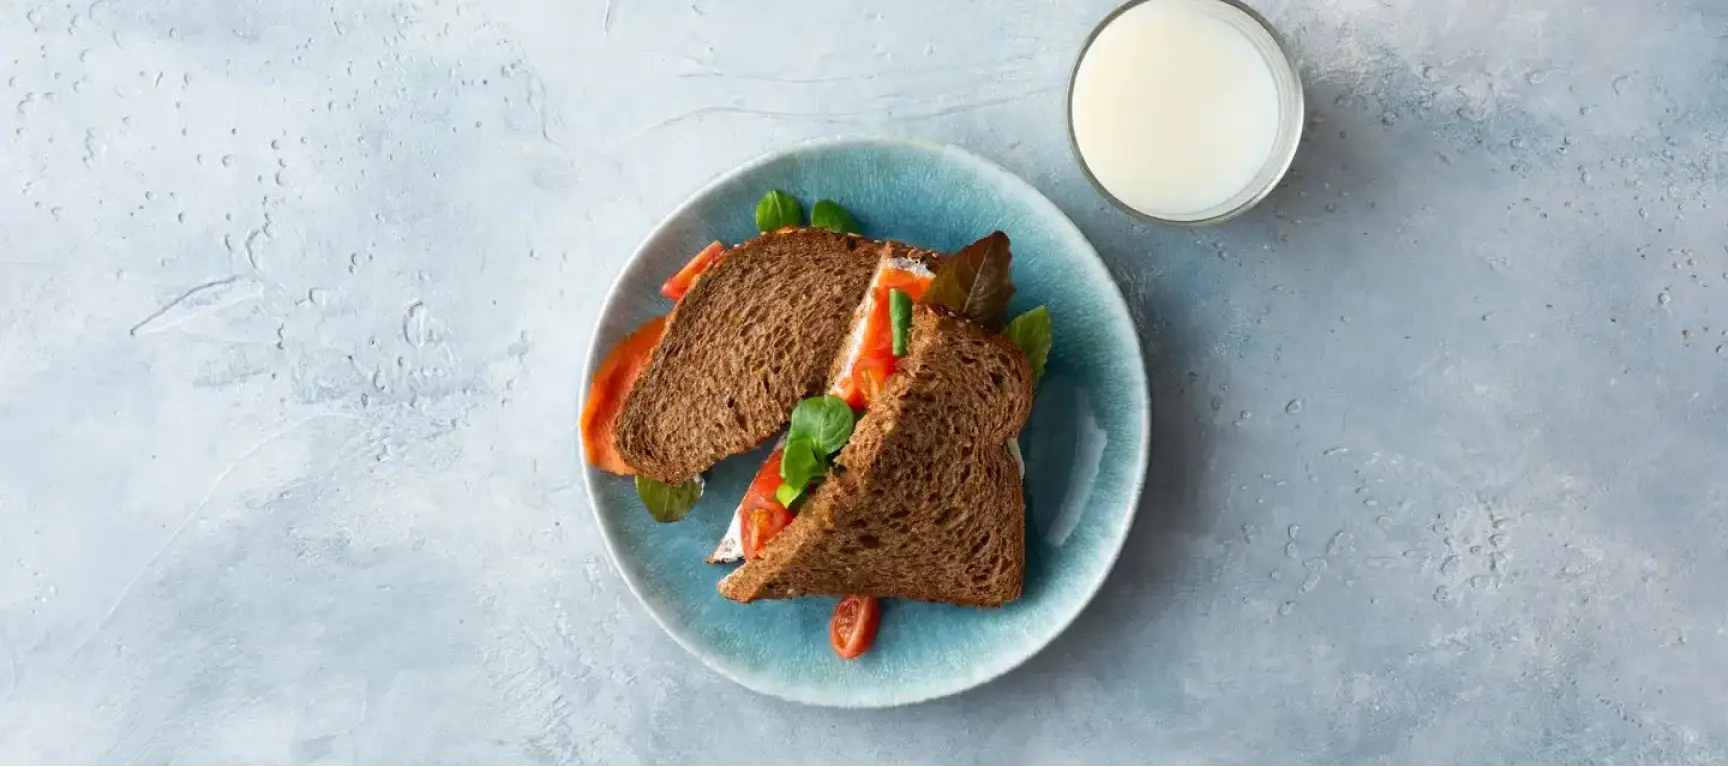 Sandwich with dairy spread, salmon fillet and a glass of milk